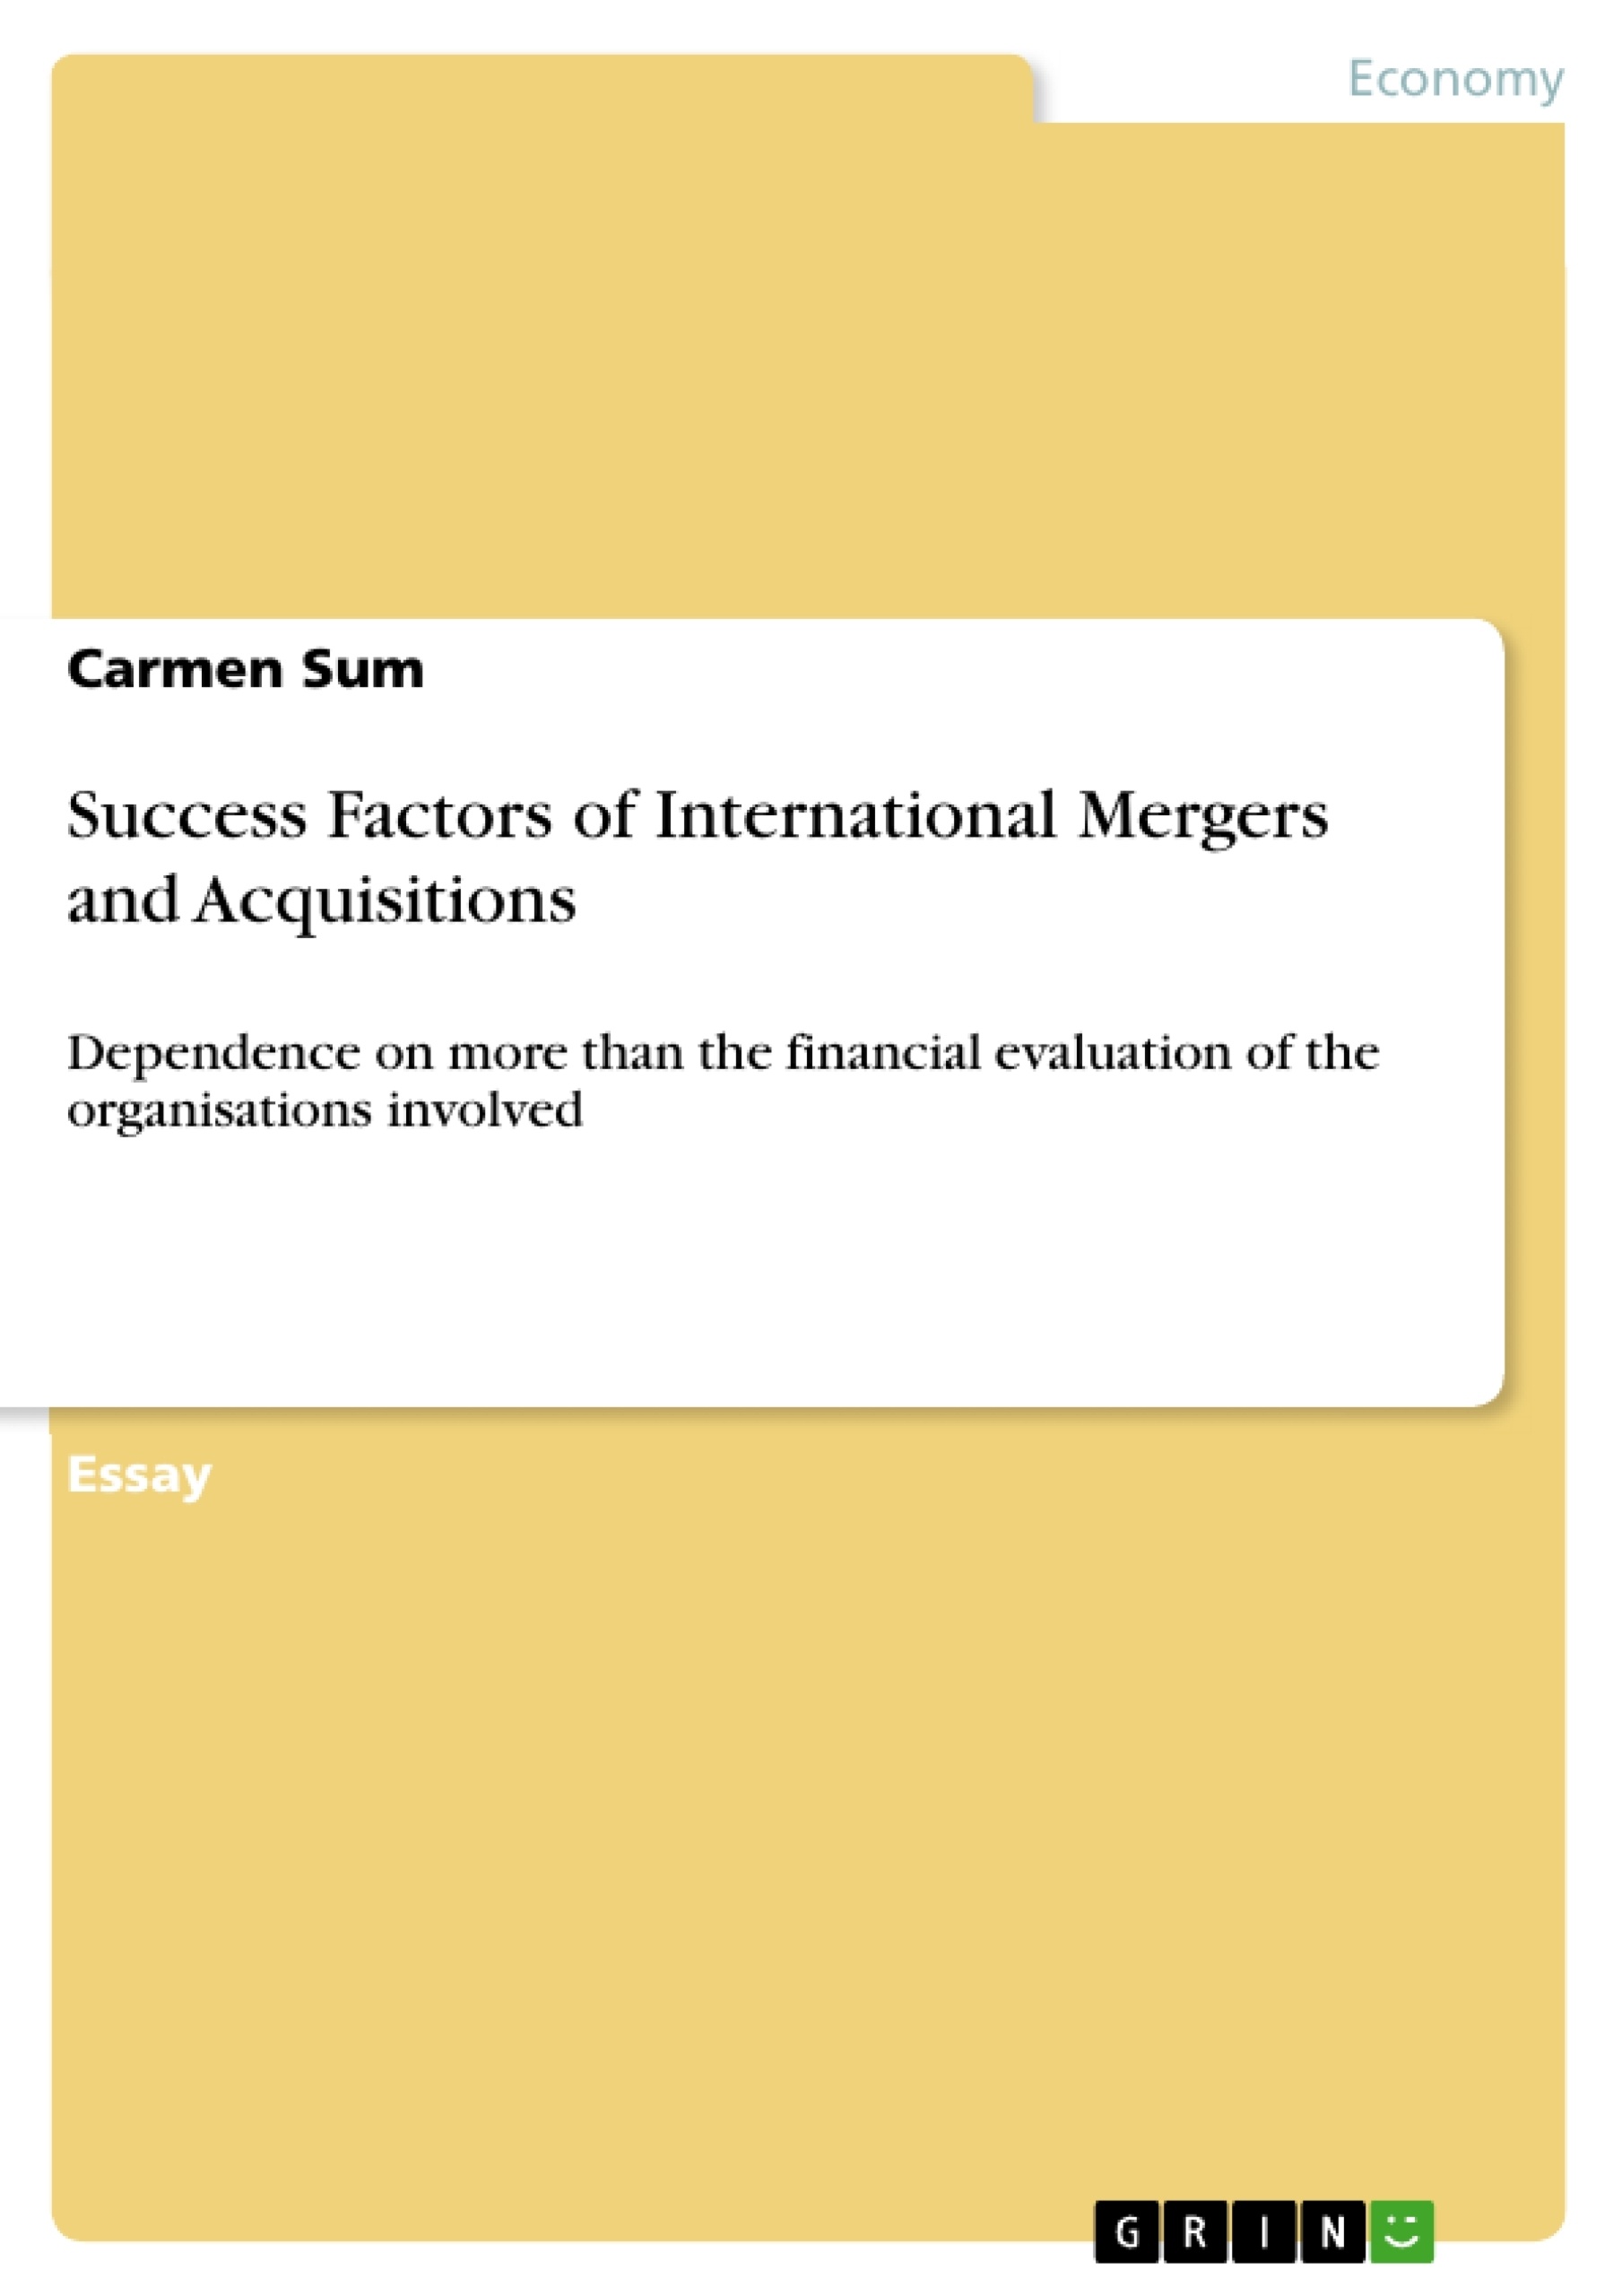 Title: Success Factors of International Mergers and Acquisitions